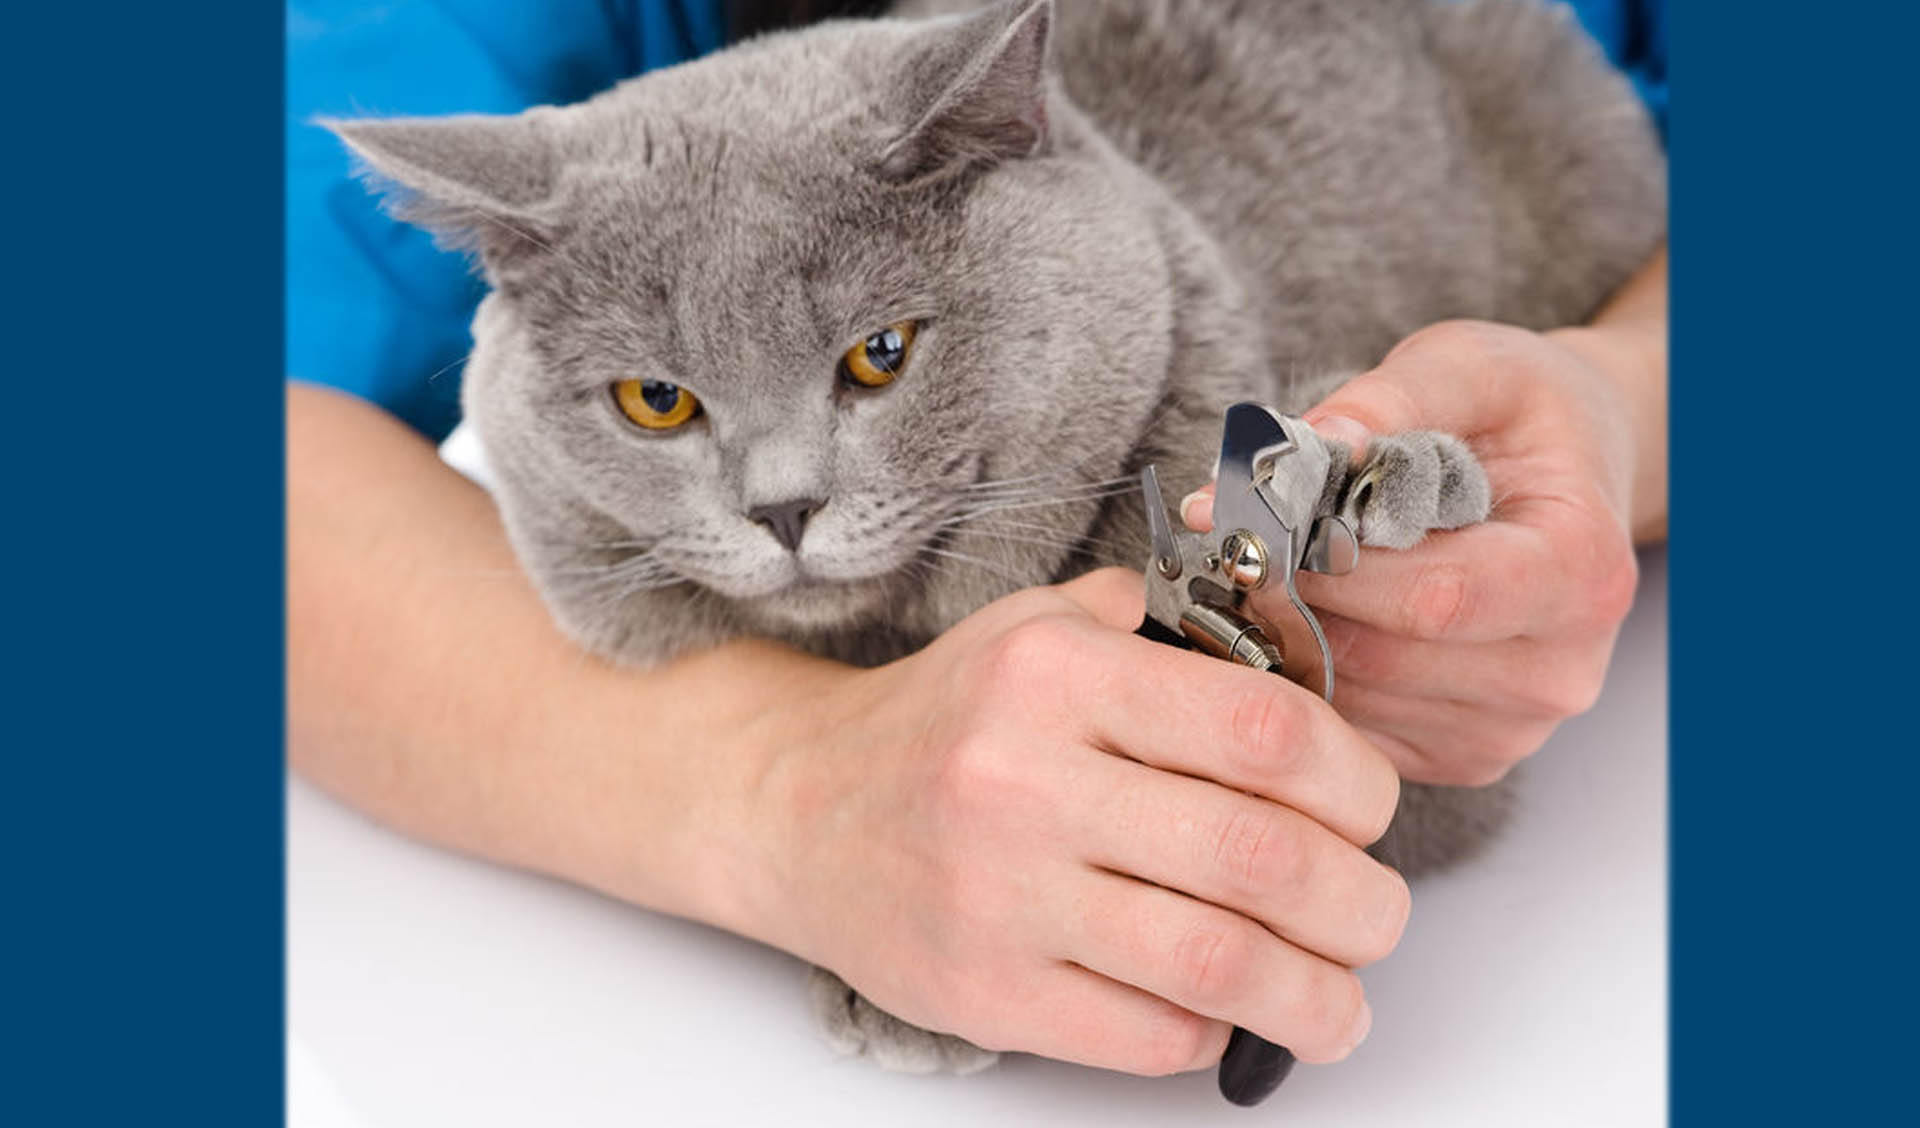 How To Trim Your Cat's Nails - Centrepointe Animal Hospital